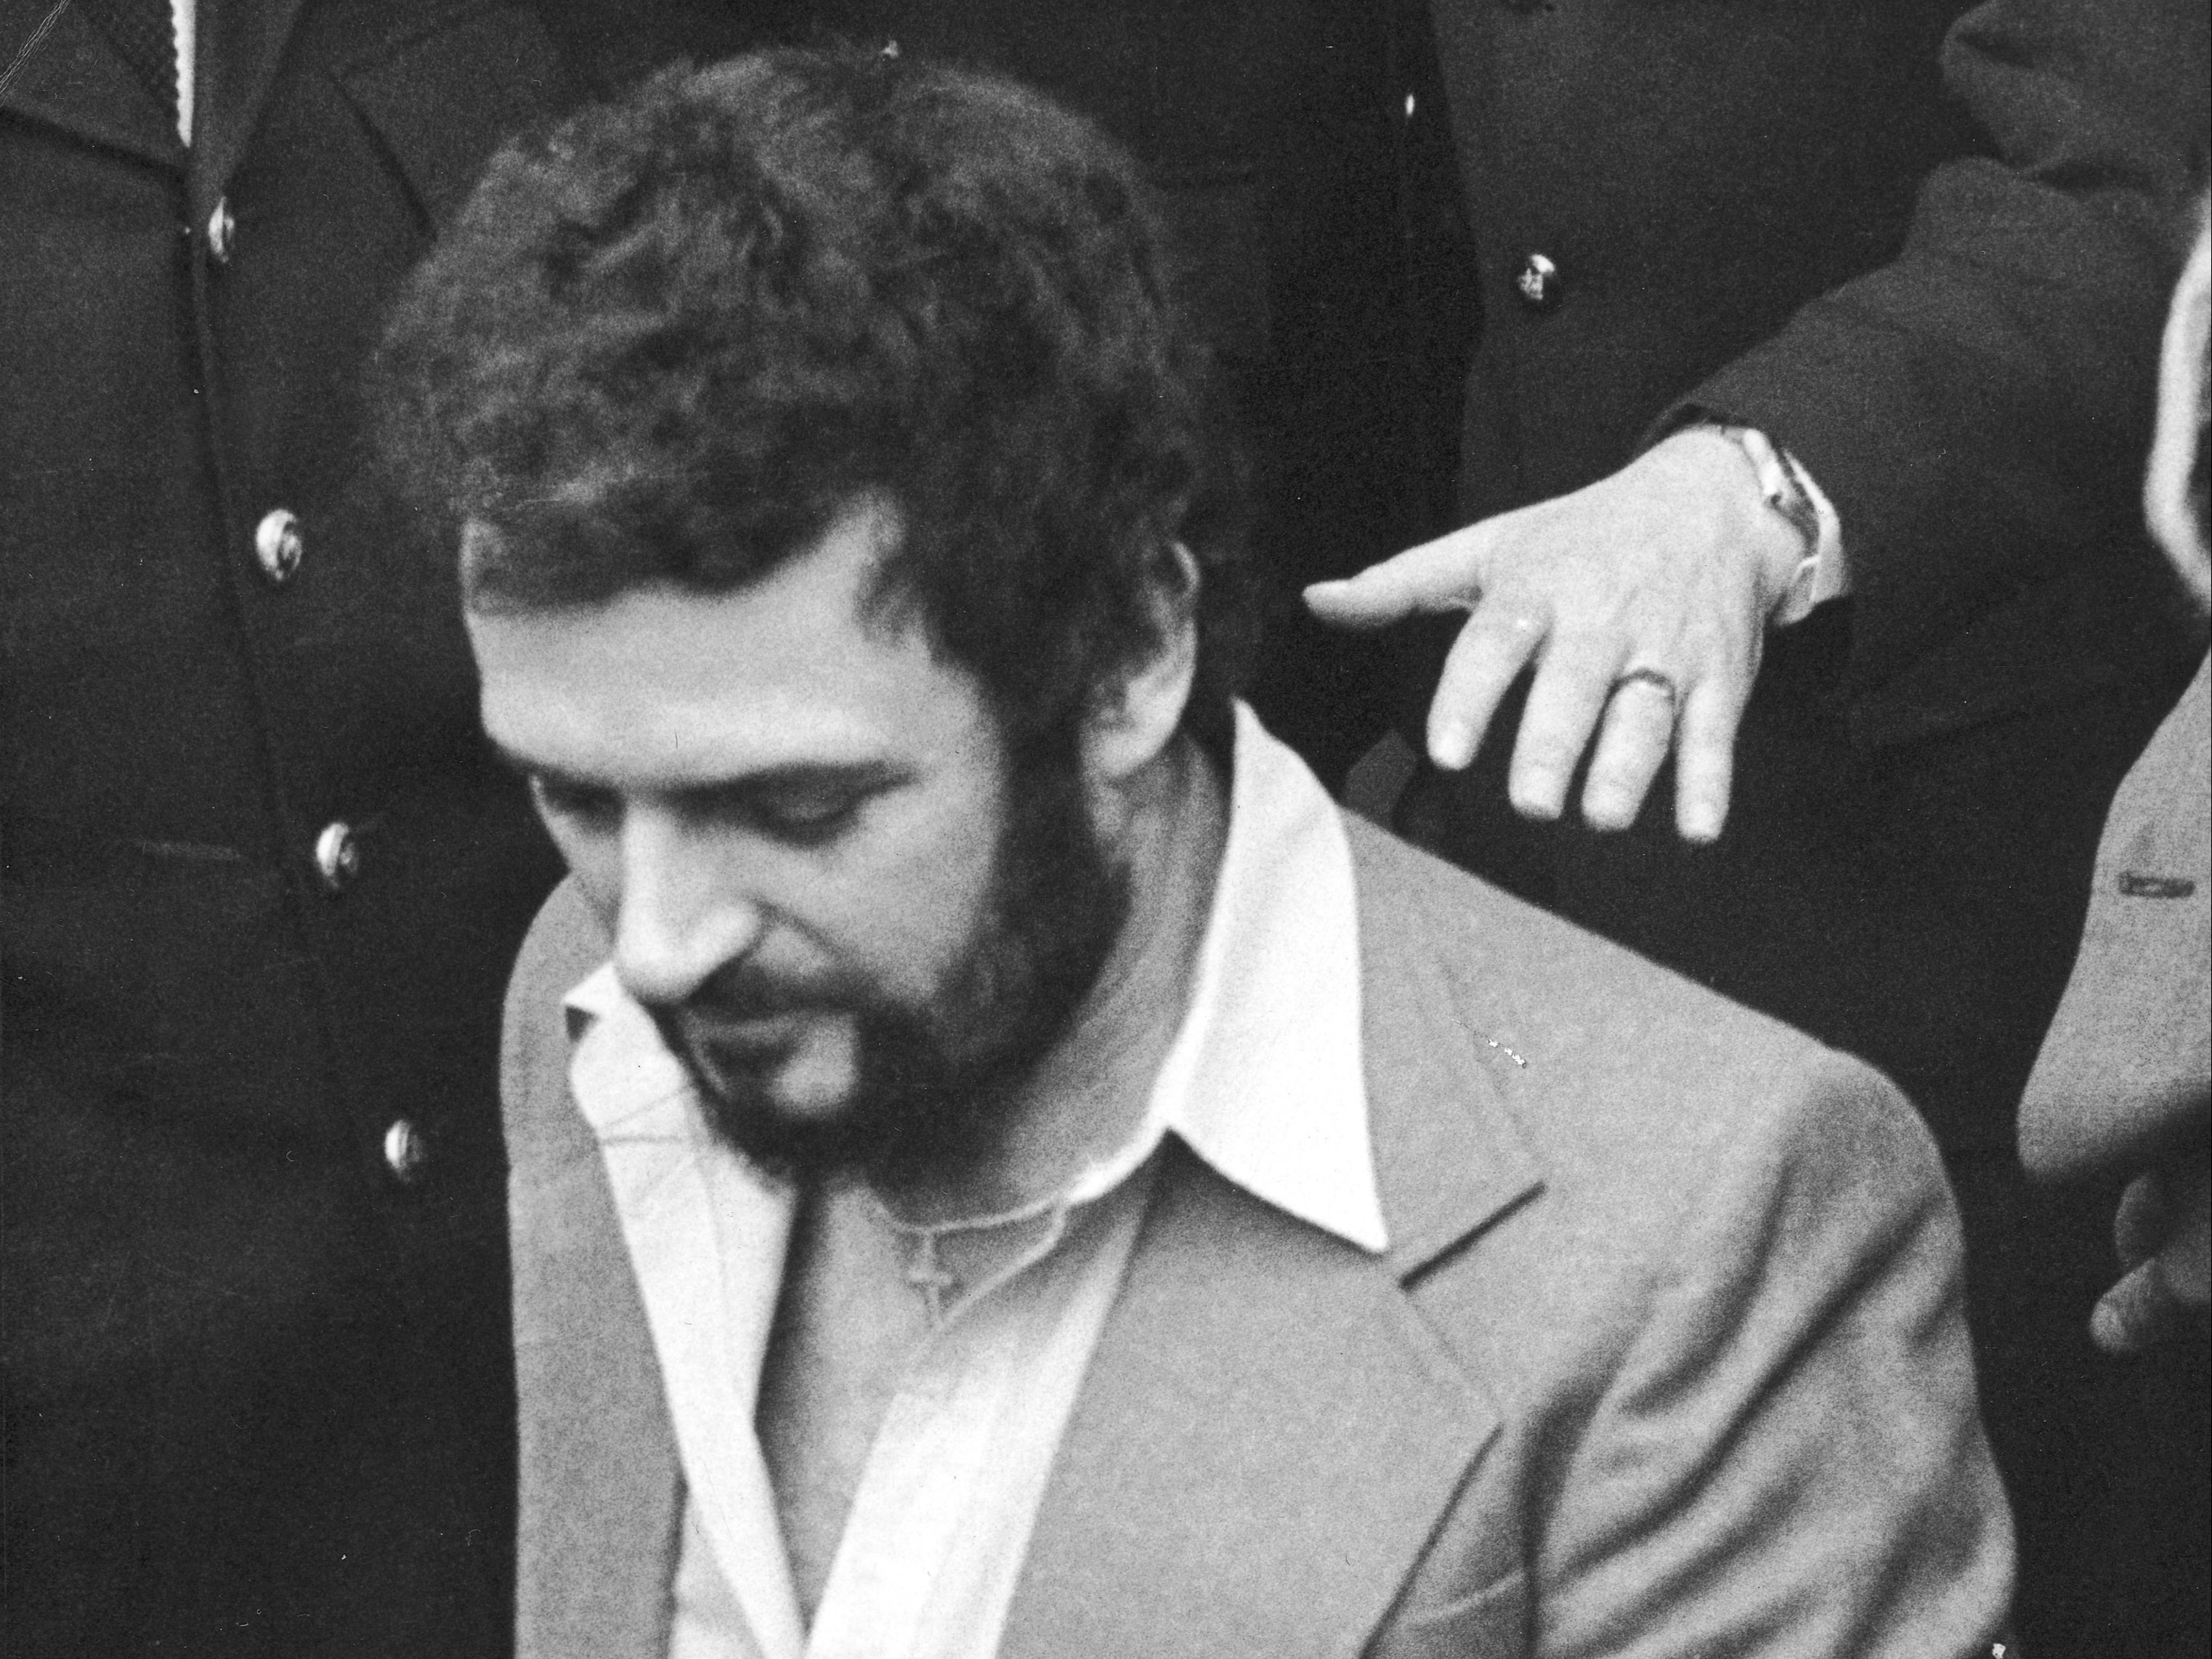 Peter Sutcliffe, who changed his name to Coonan, was serving a life sentence at HMP Frankland for the murders of 13 women in the 1970s